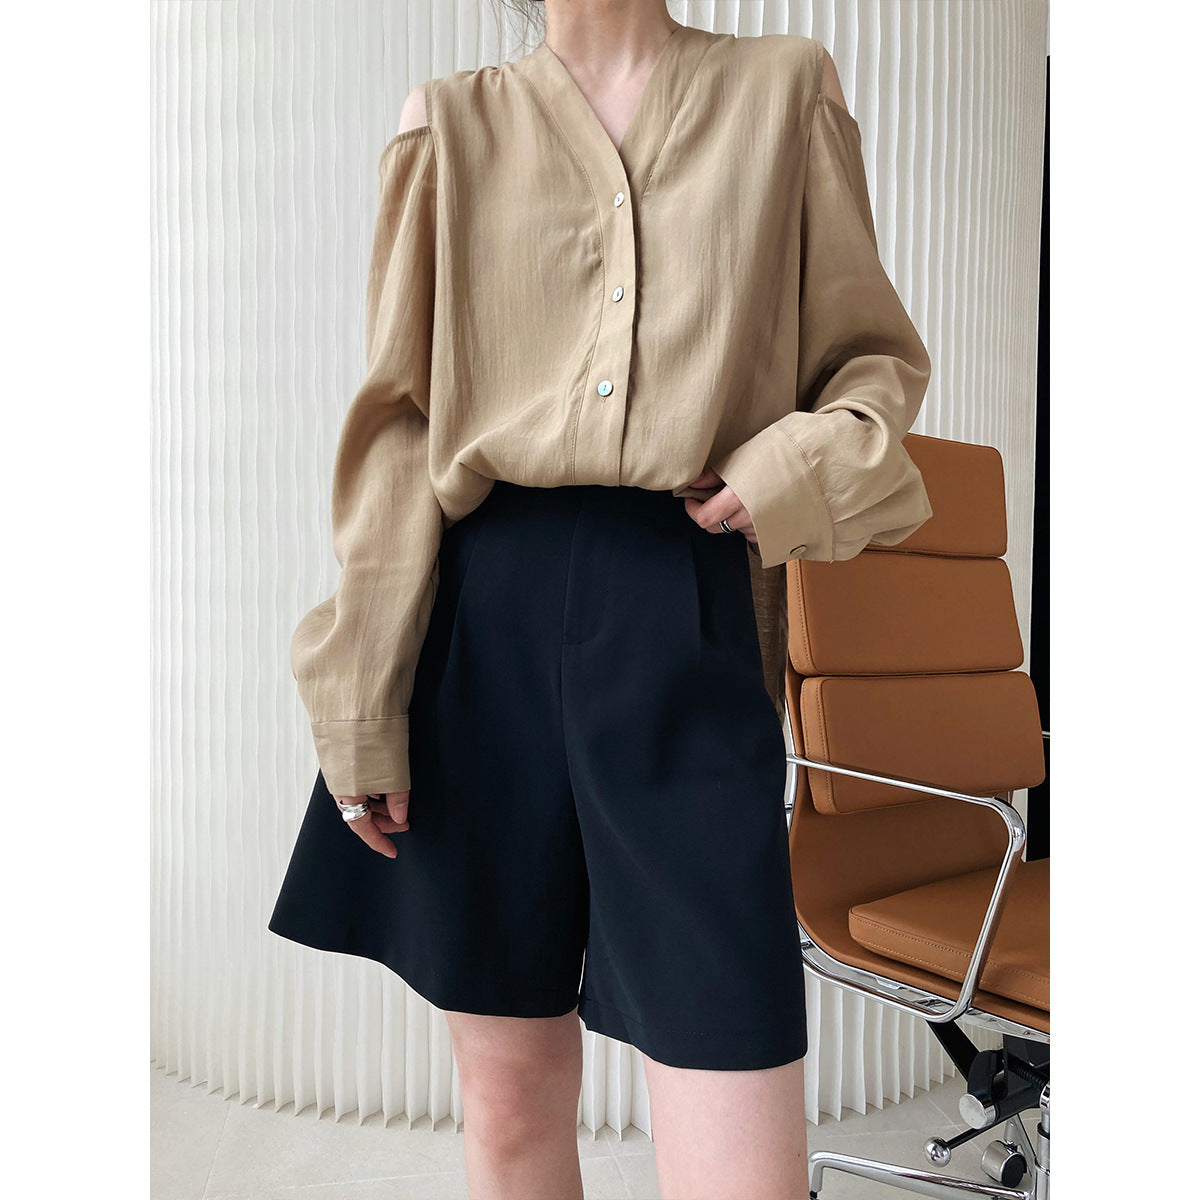 Deer Xi wide legs suit shorts female summer 2021 new high waist slim INS thin section casual five pants 1012 baby magazin 